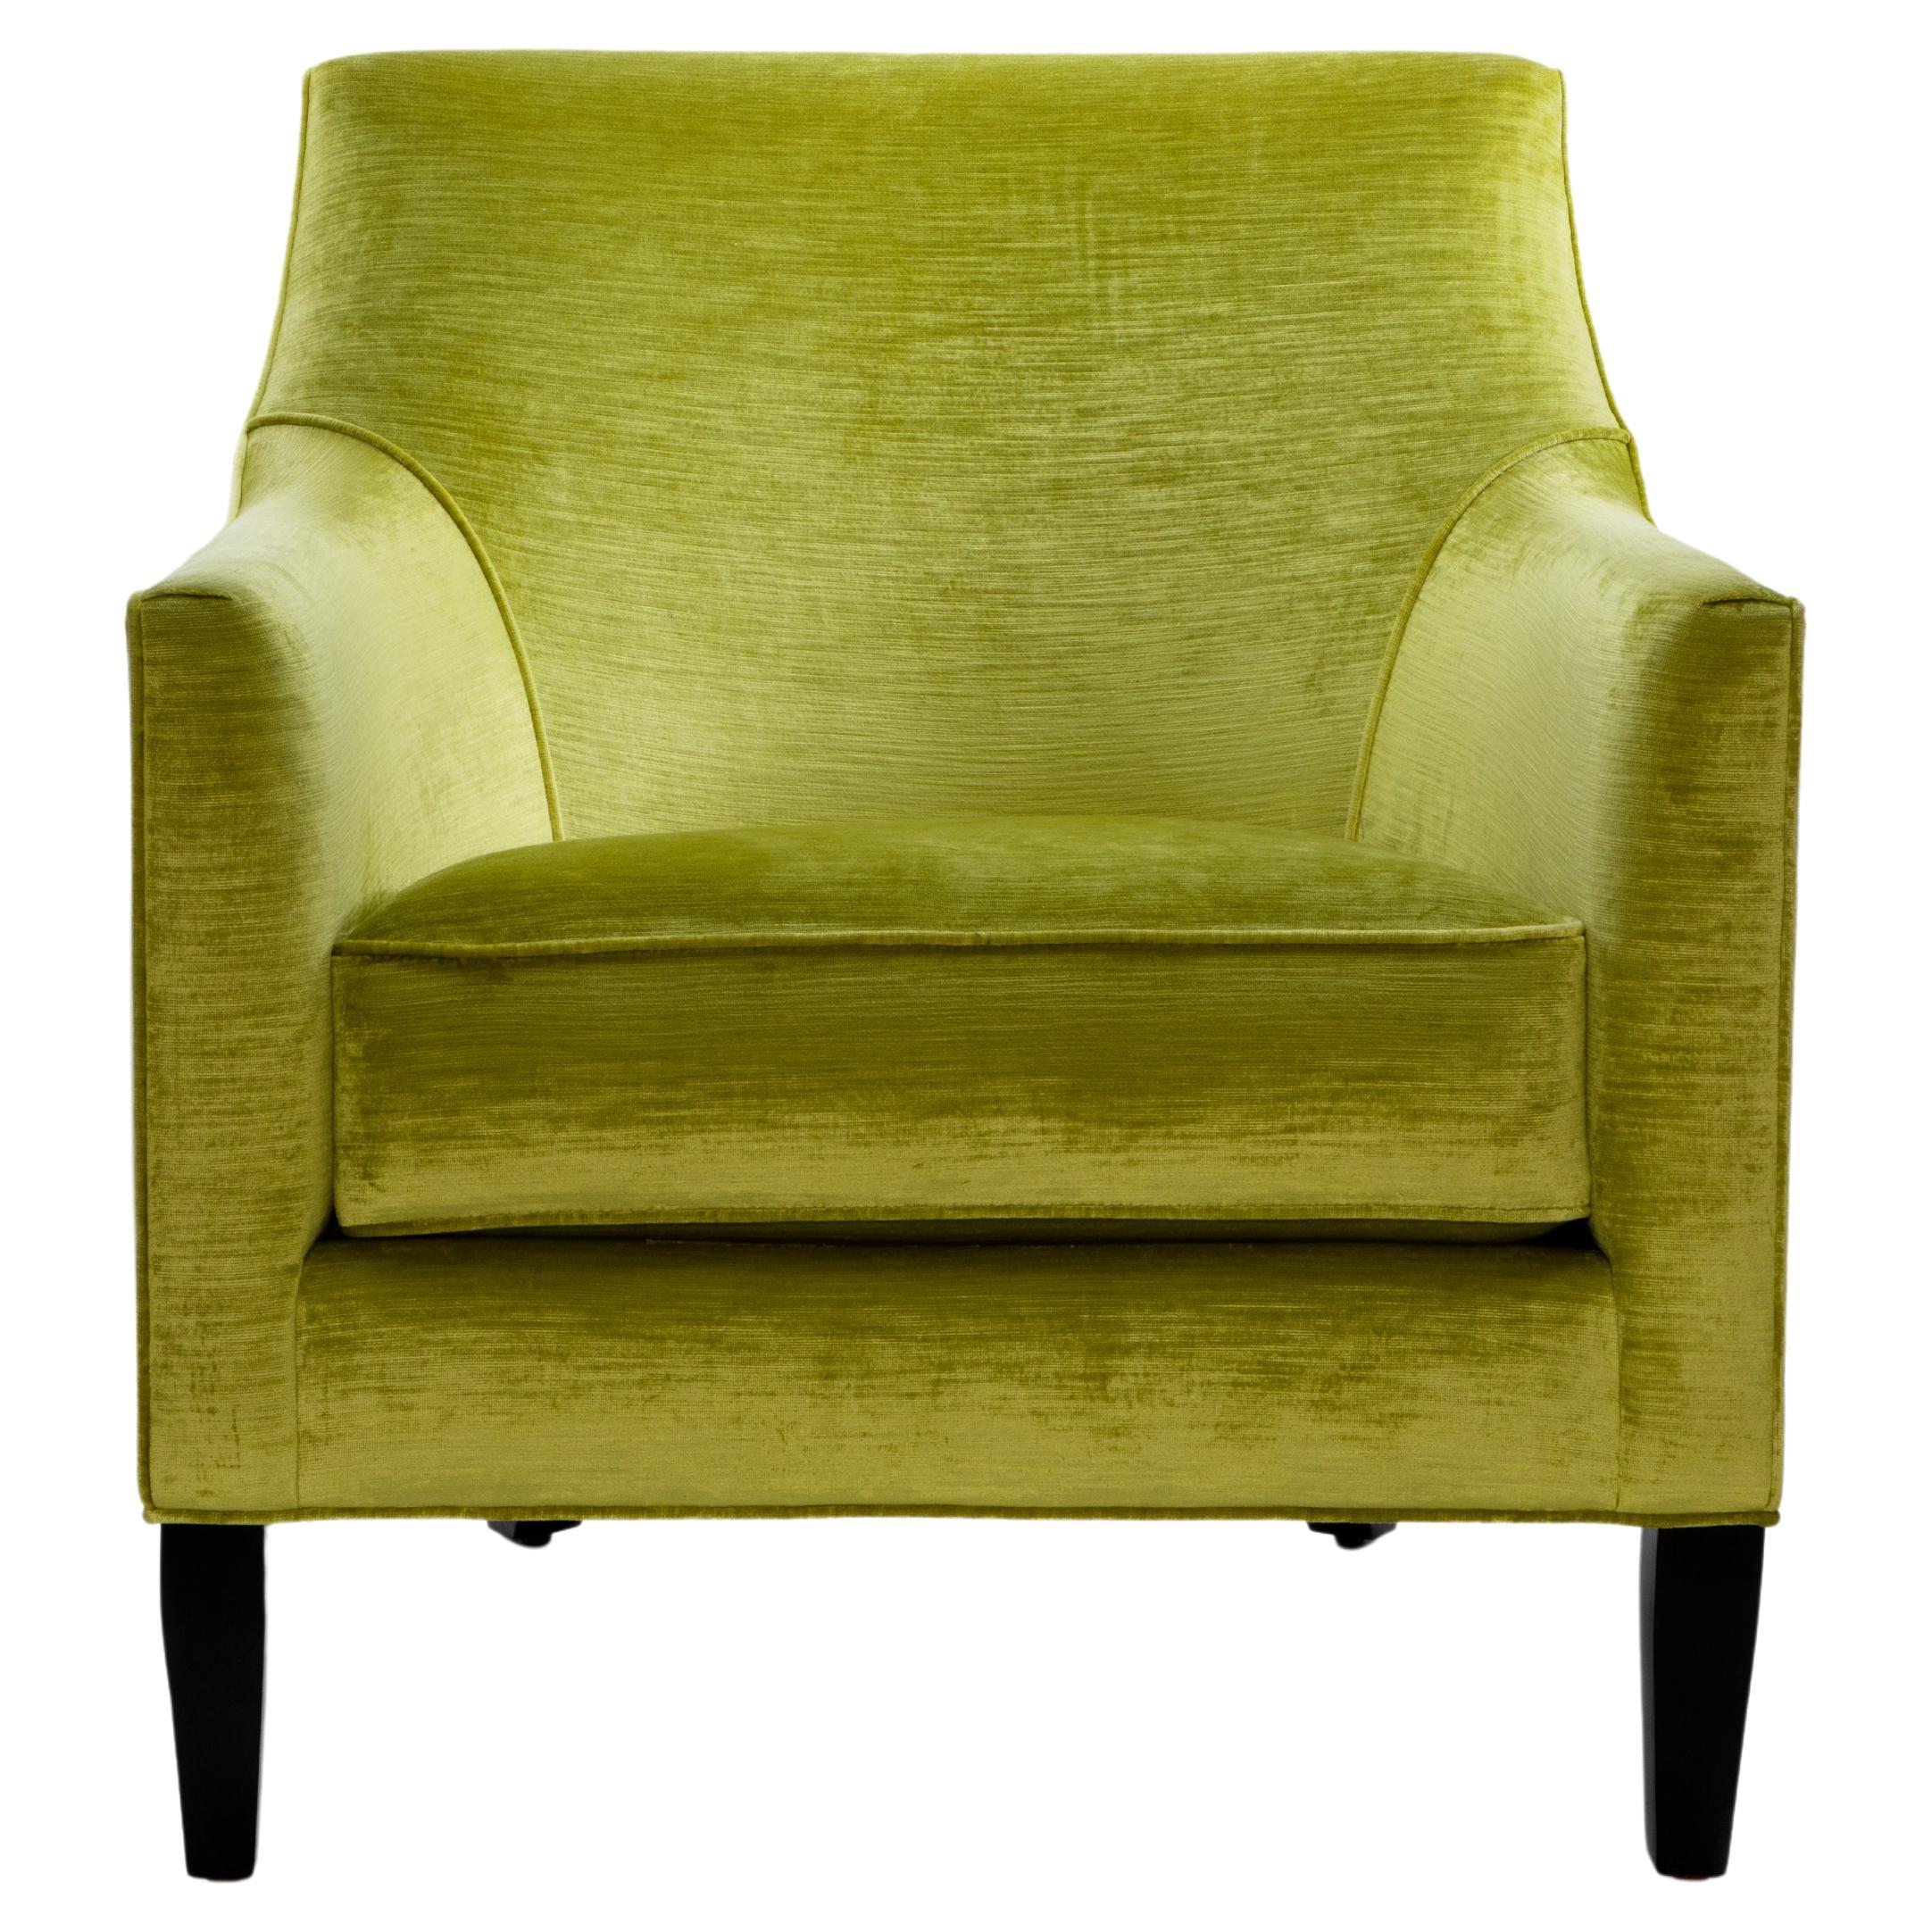 Contemporary Lucia Armchair Handcrafted by James by Jimmy Delaurentis